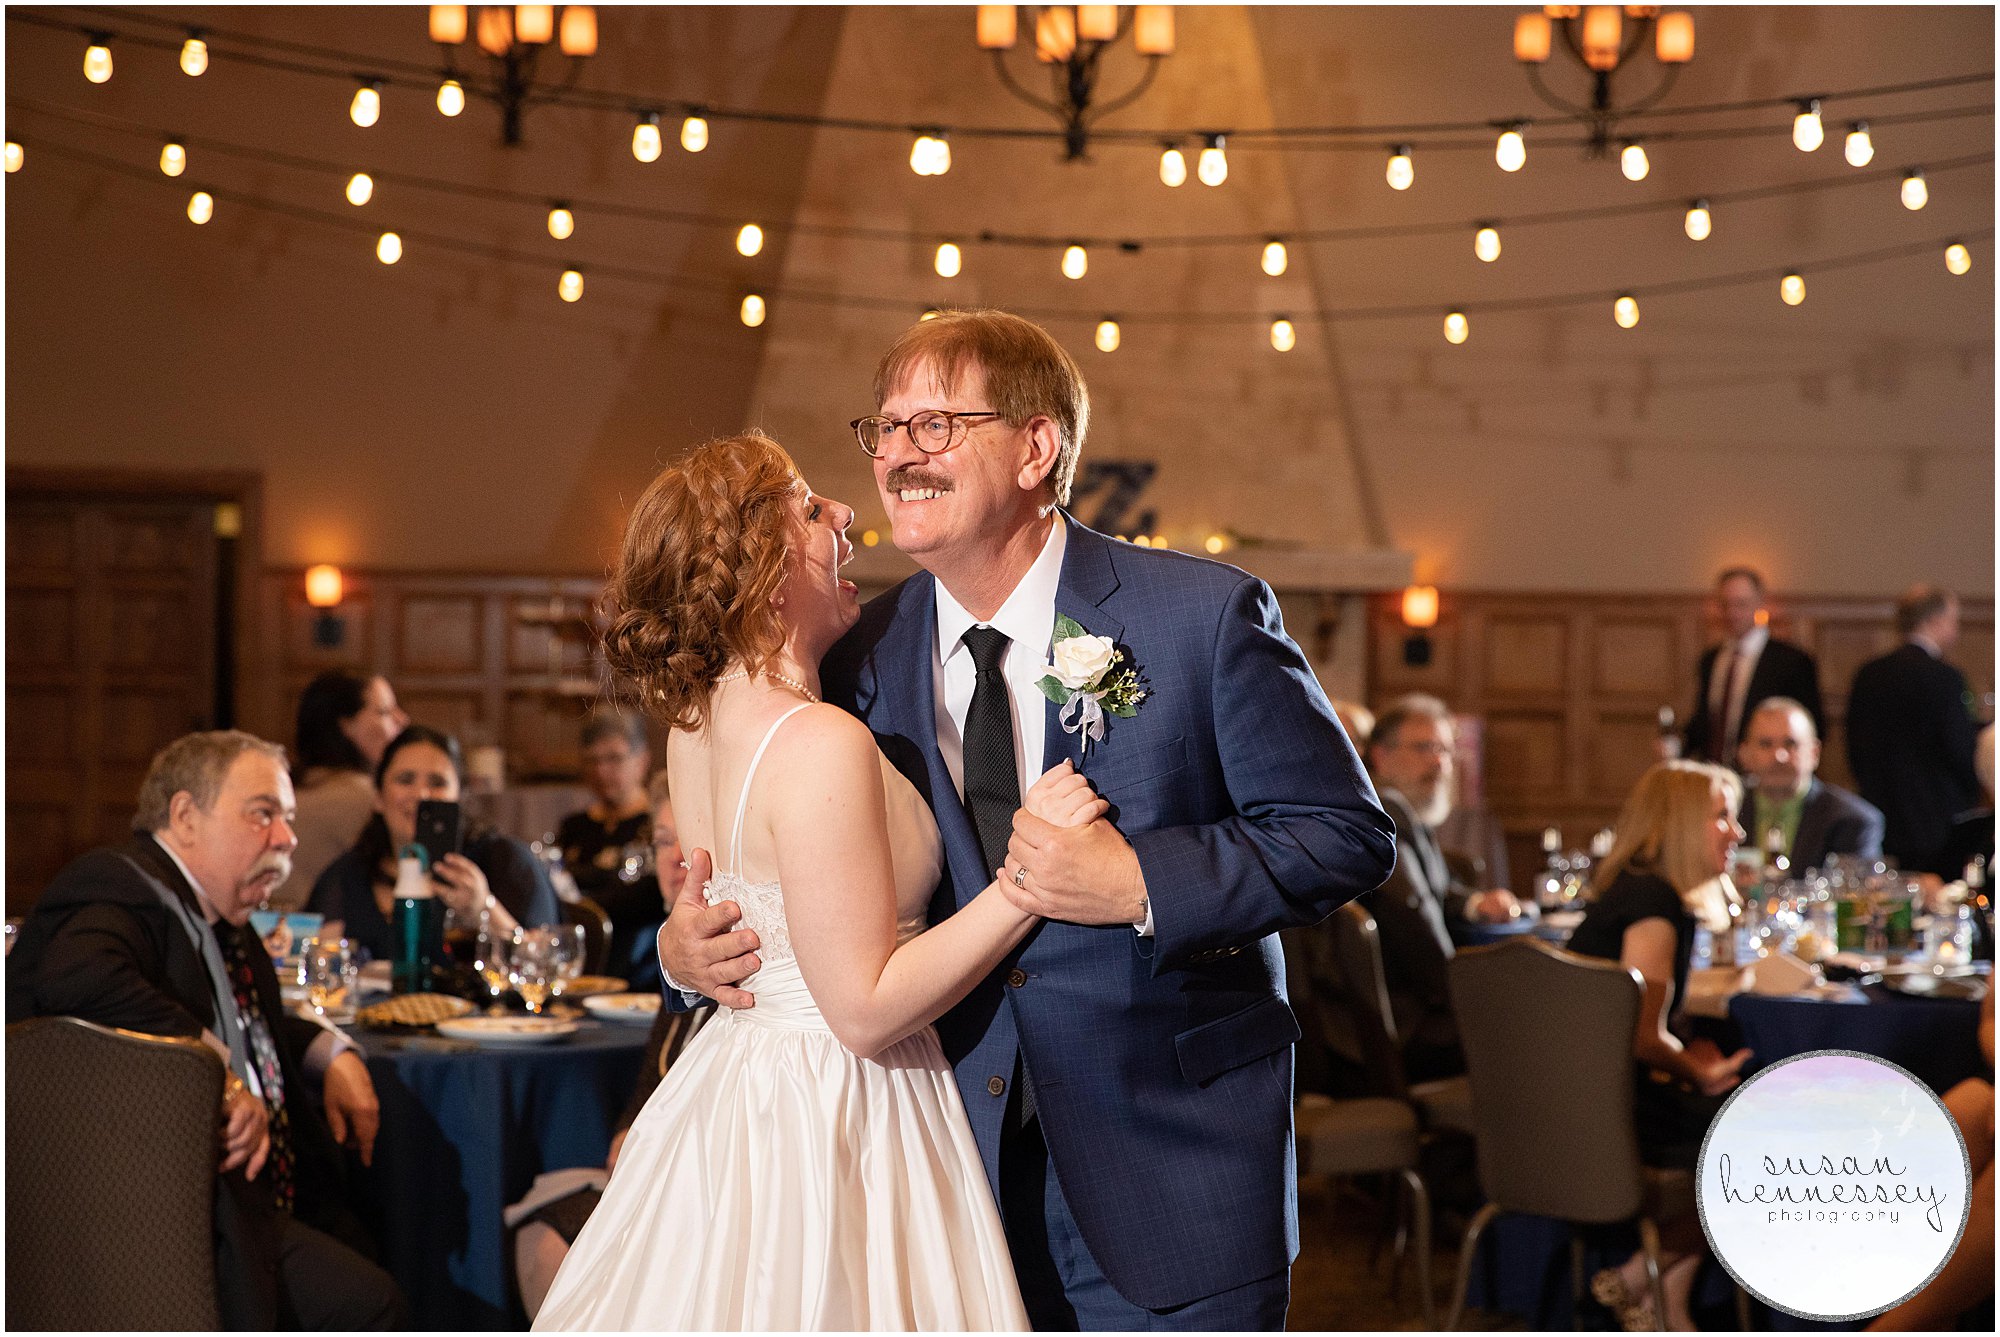 Bride and father dance at winter wedding in Moorestown, NJ